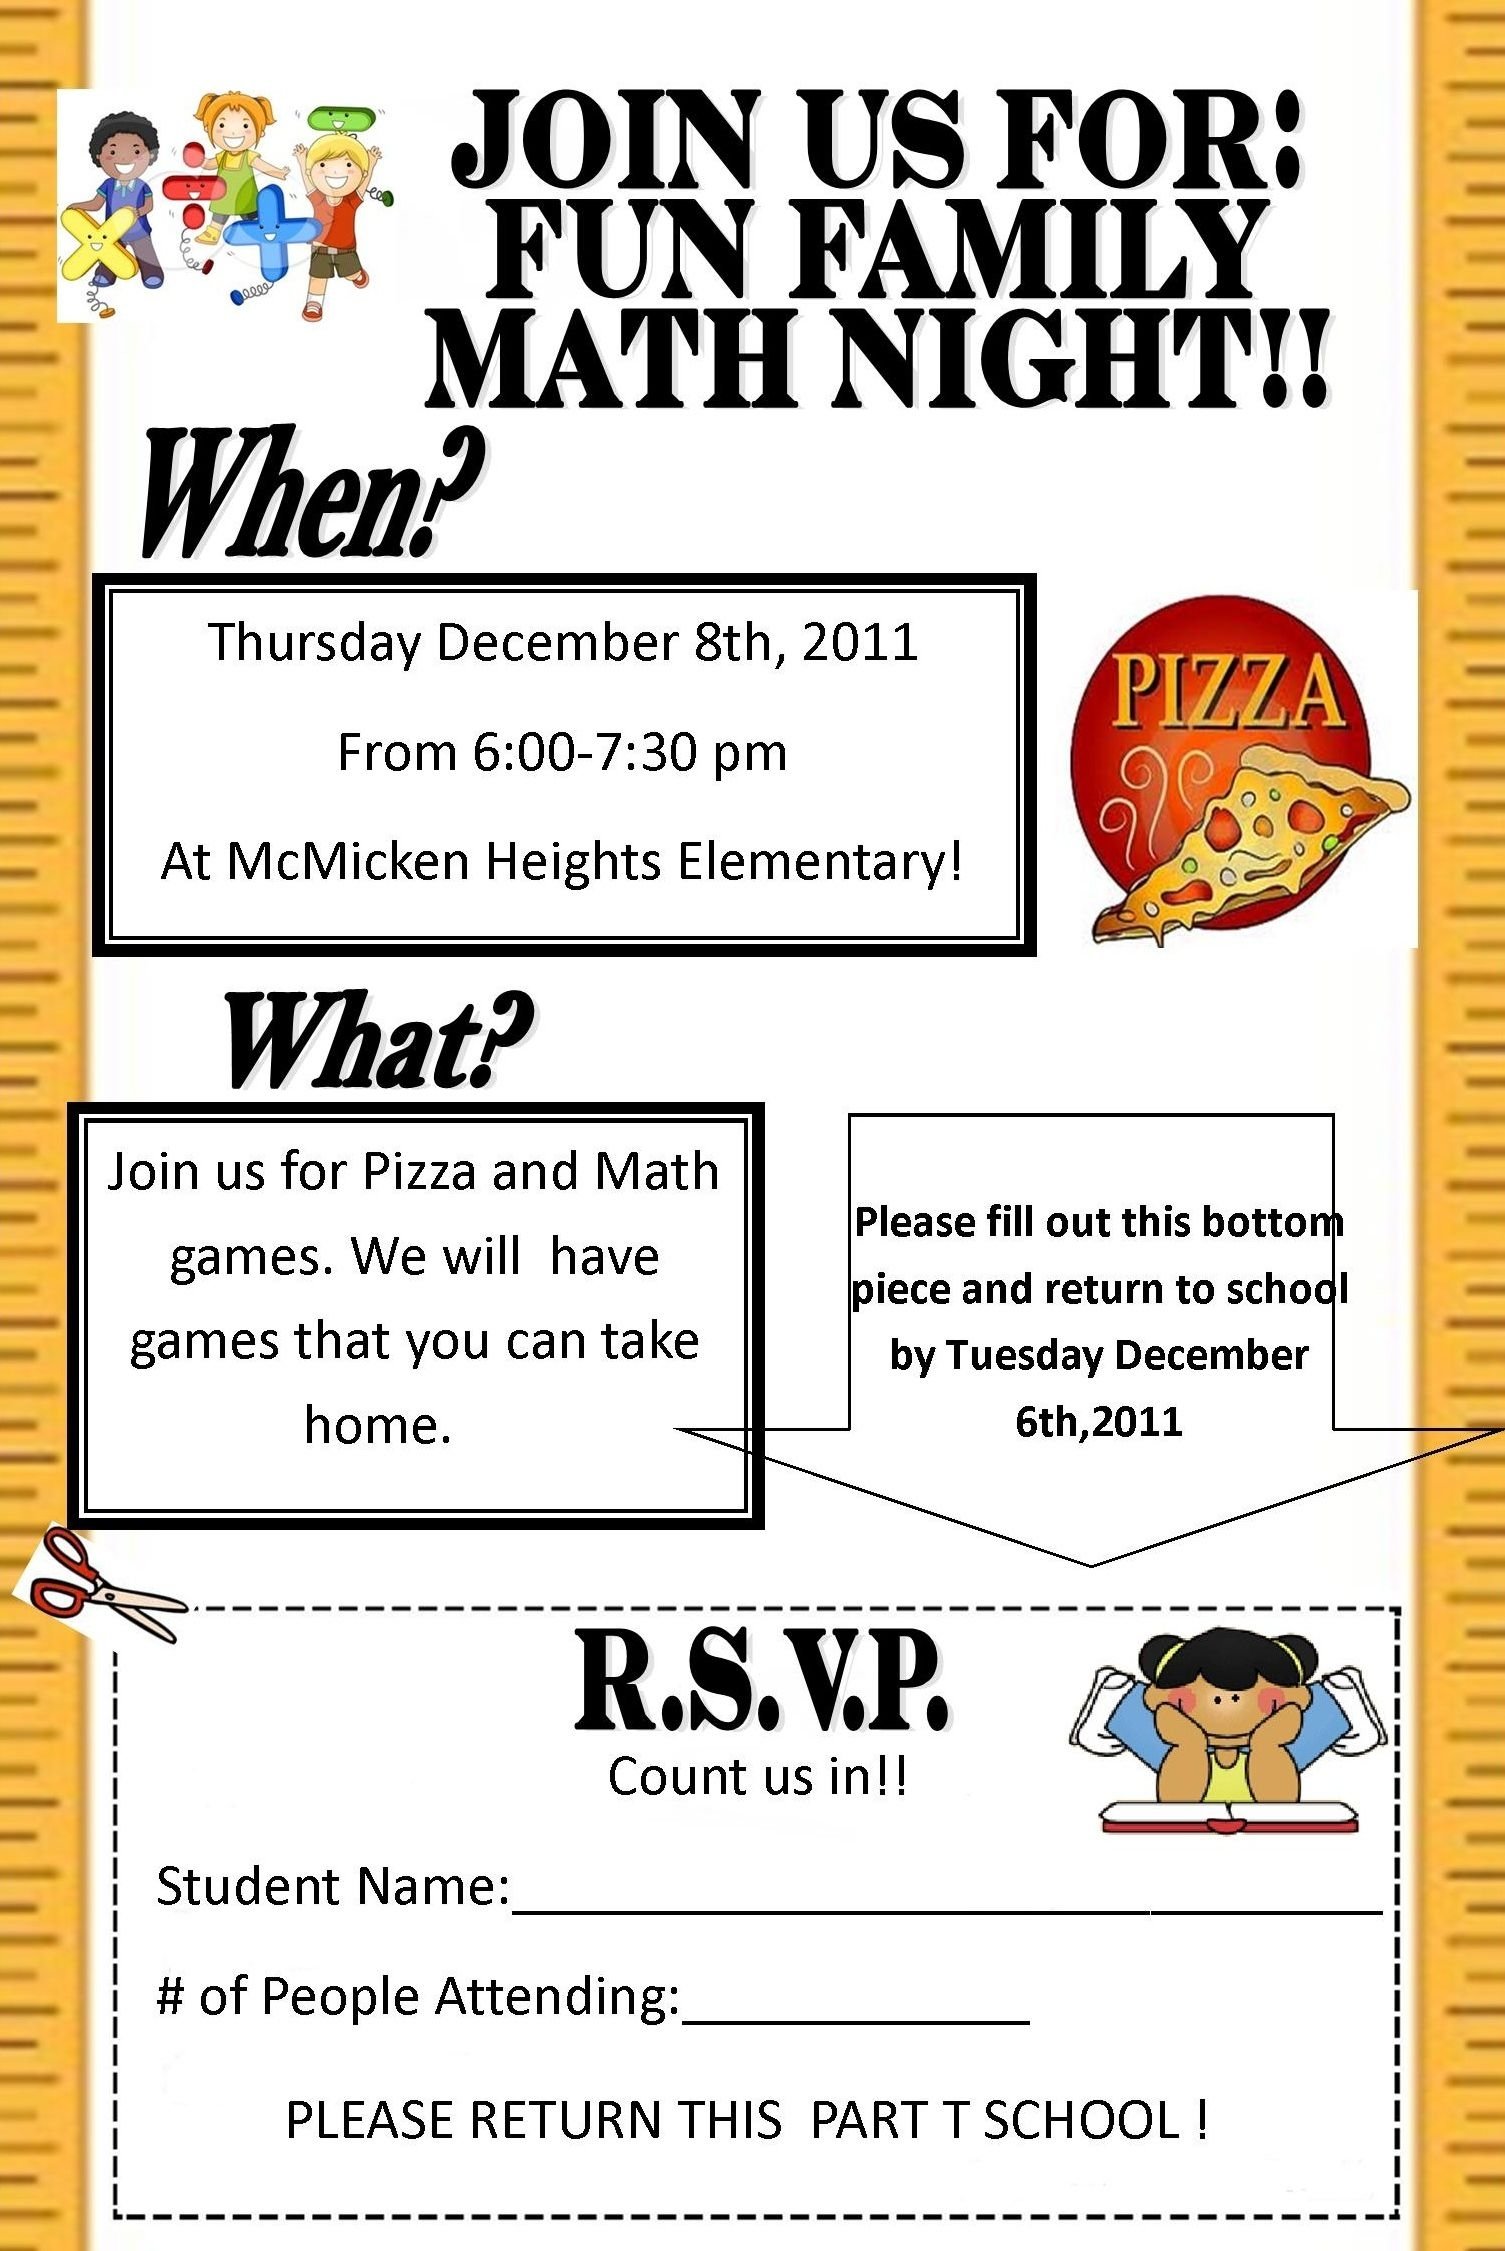 10 Famous Family Fun Night Ideas For Schools flyer for family math night google search math parent night 2023